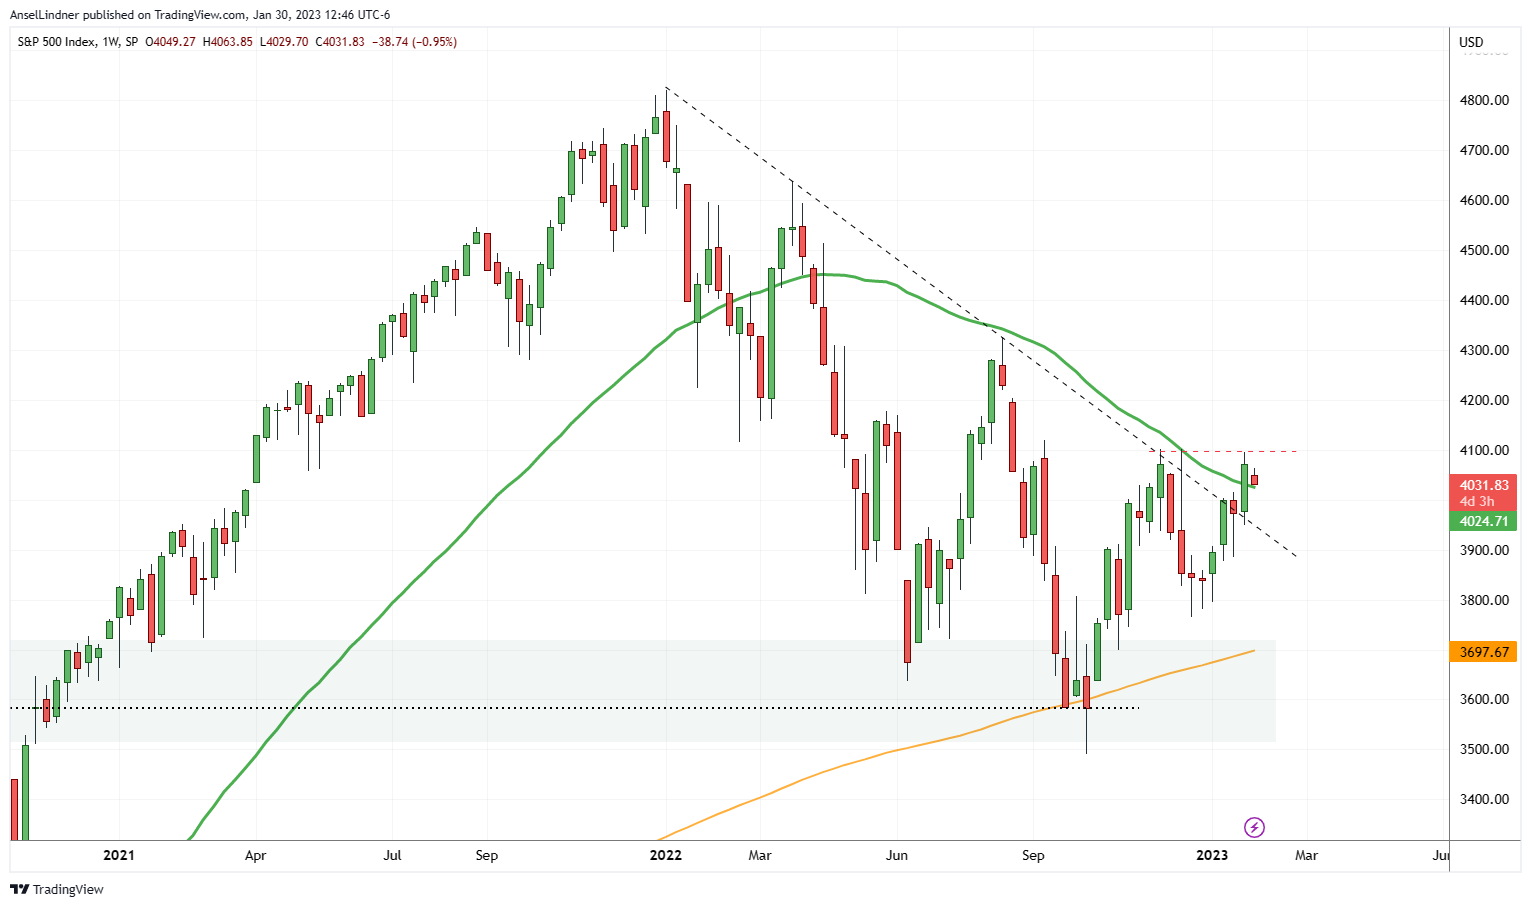 S&P 500 weekly chart, with 50 and 200-week moving averages